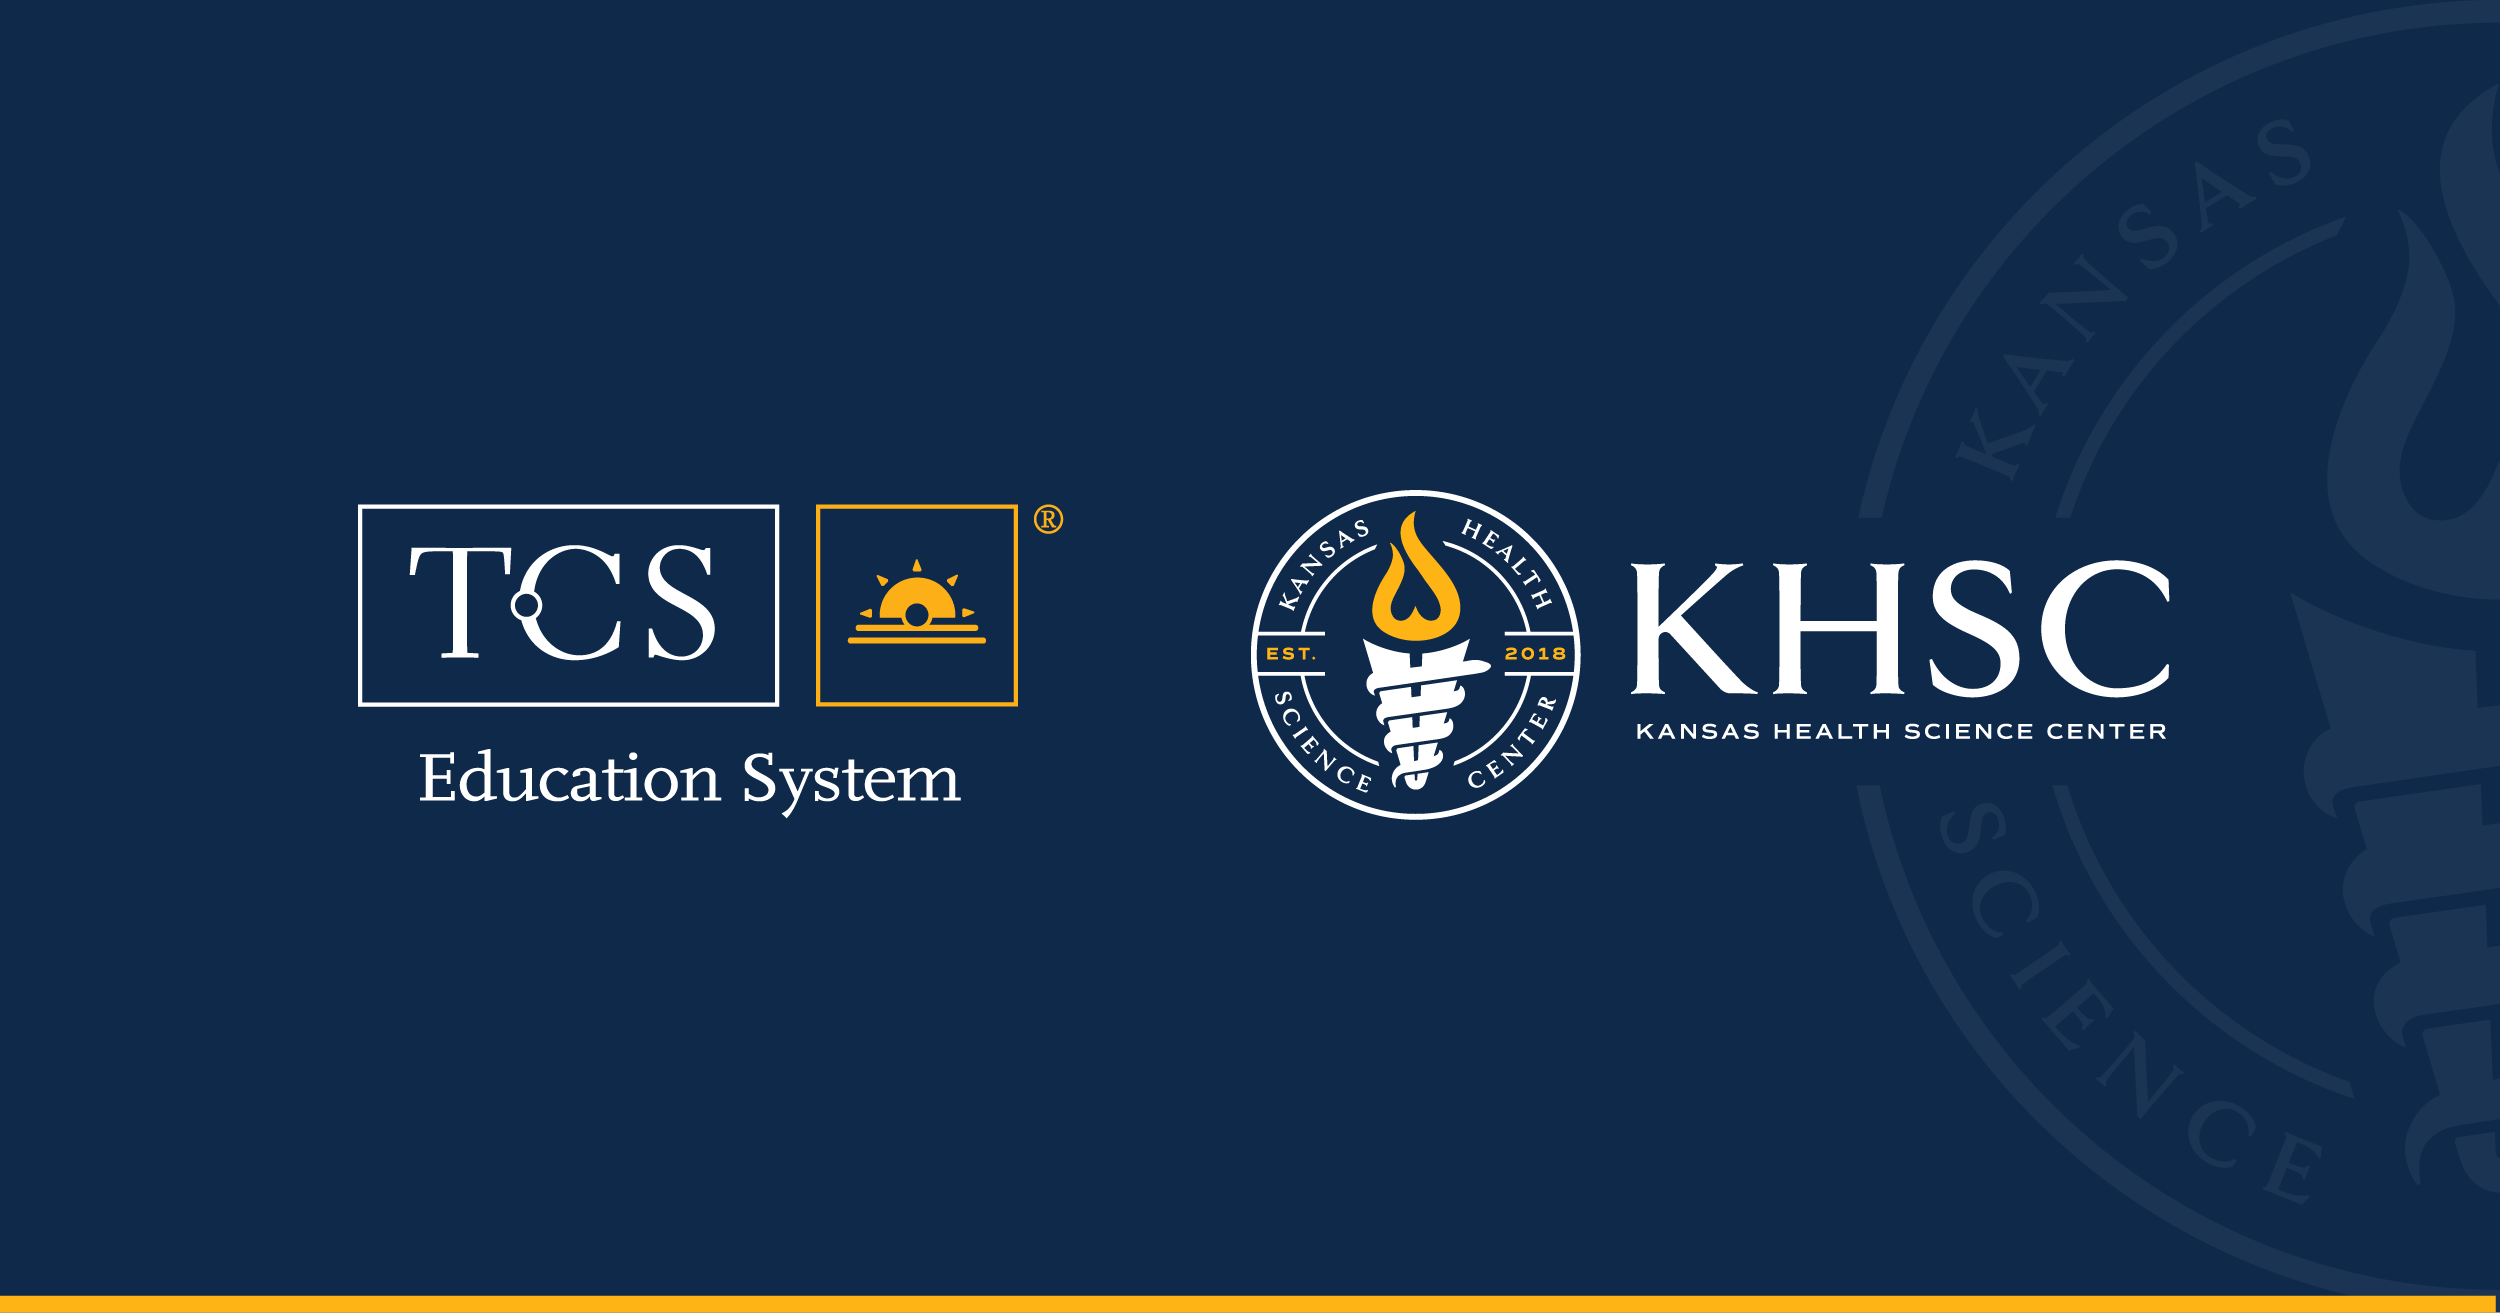 TCS Education System with KHSC Logo